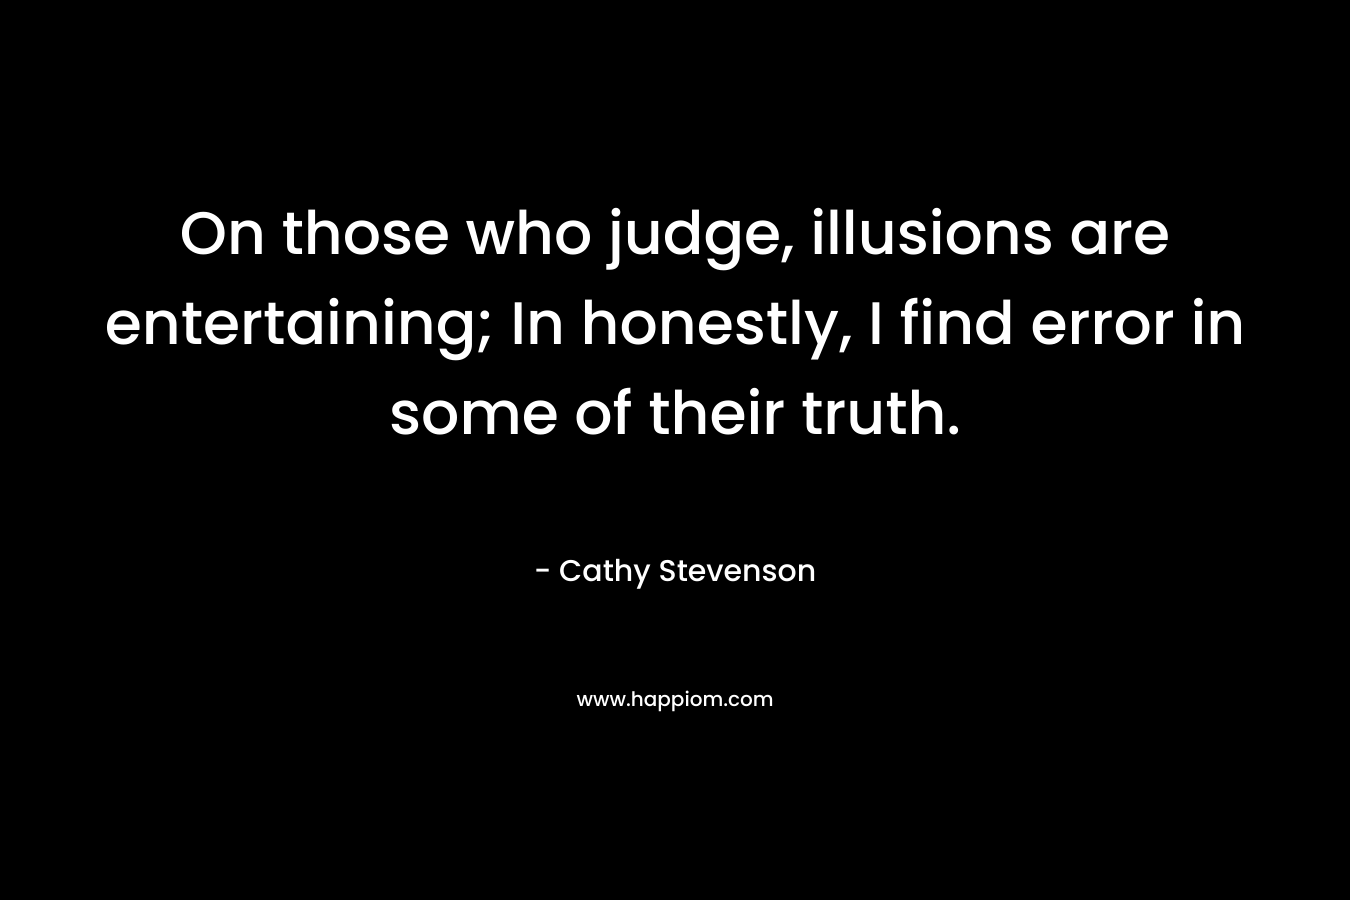 On those who judge, illusions are entertaining; In honestly, I find error in some of their truth. – Cathy Stevenson